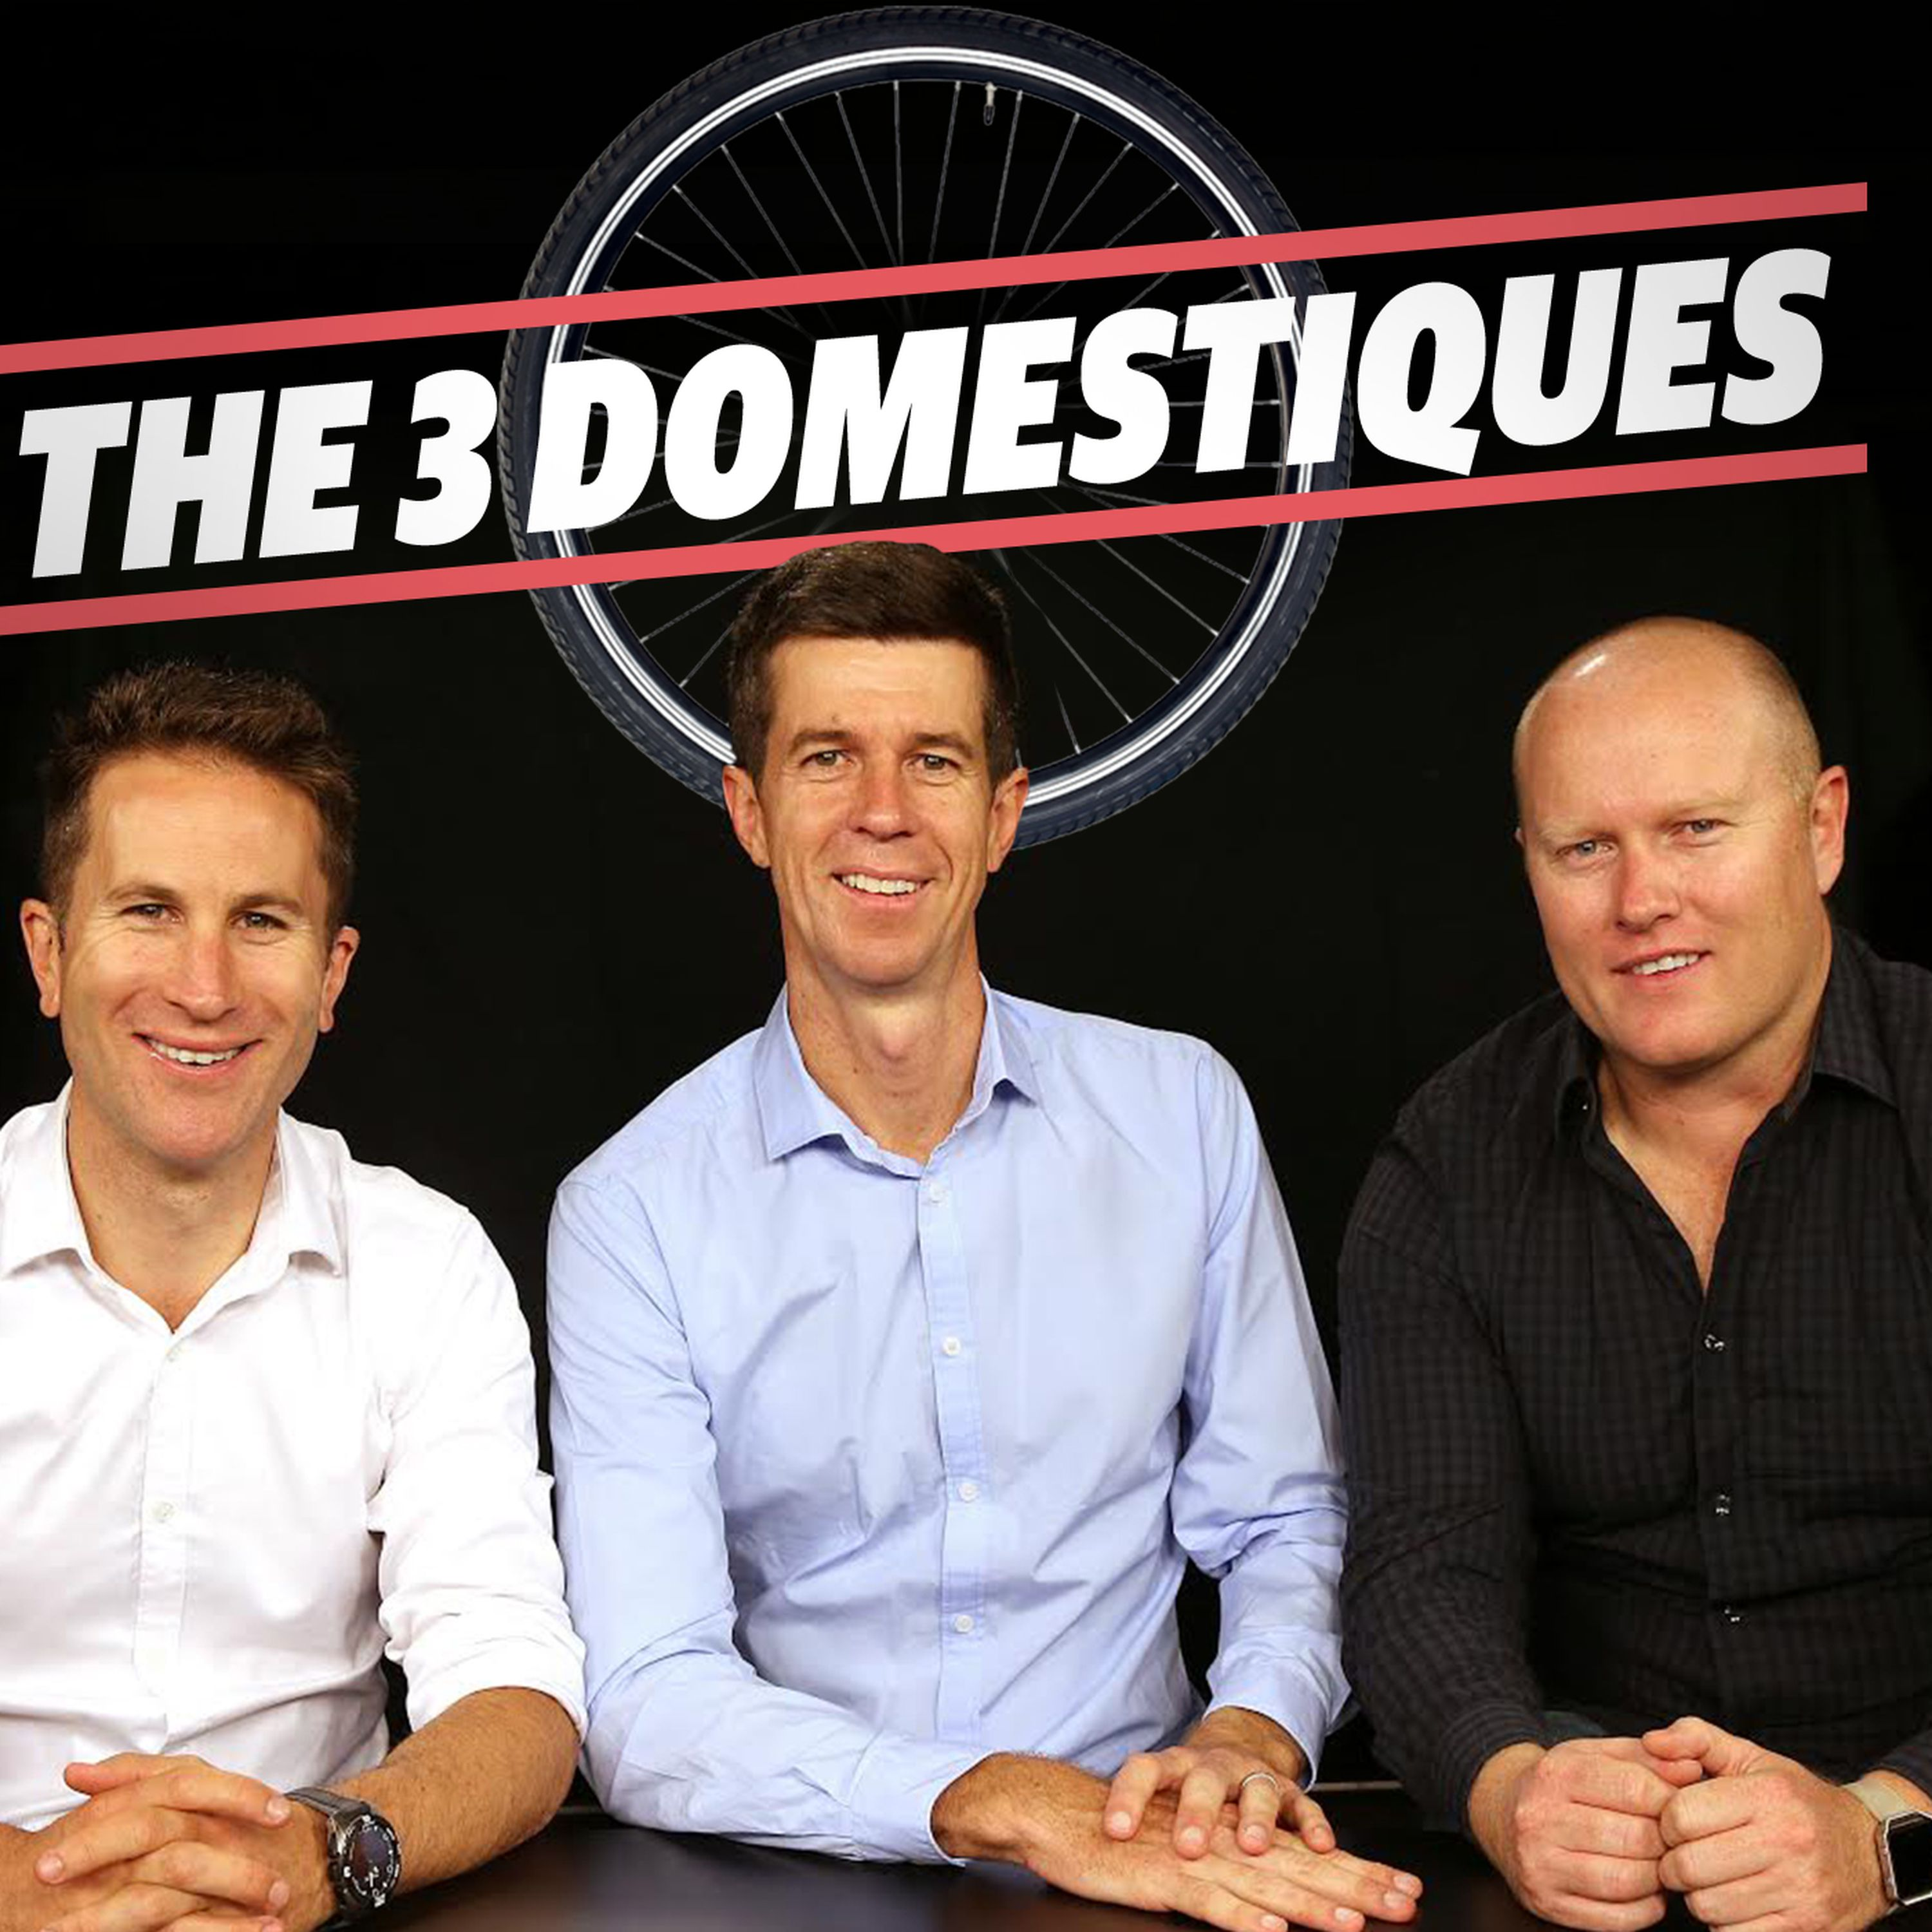 Episode 1: Backstage Pass, IndiPac latest, 'The Tinkov' and Durbo's Flanders chances